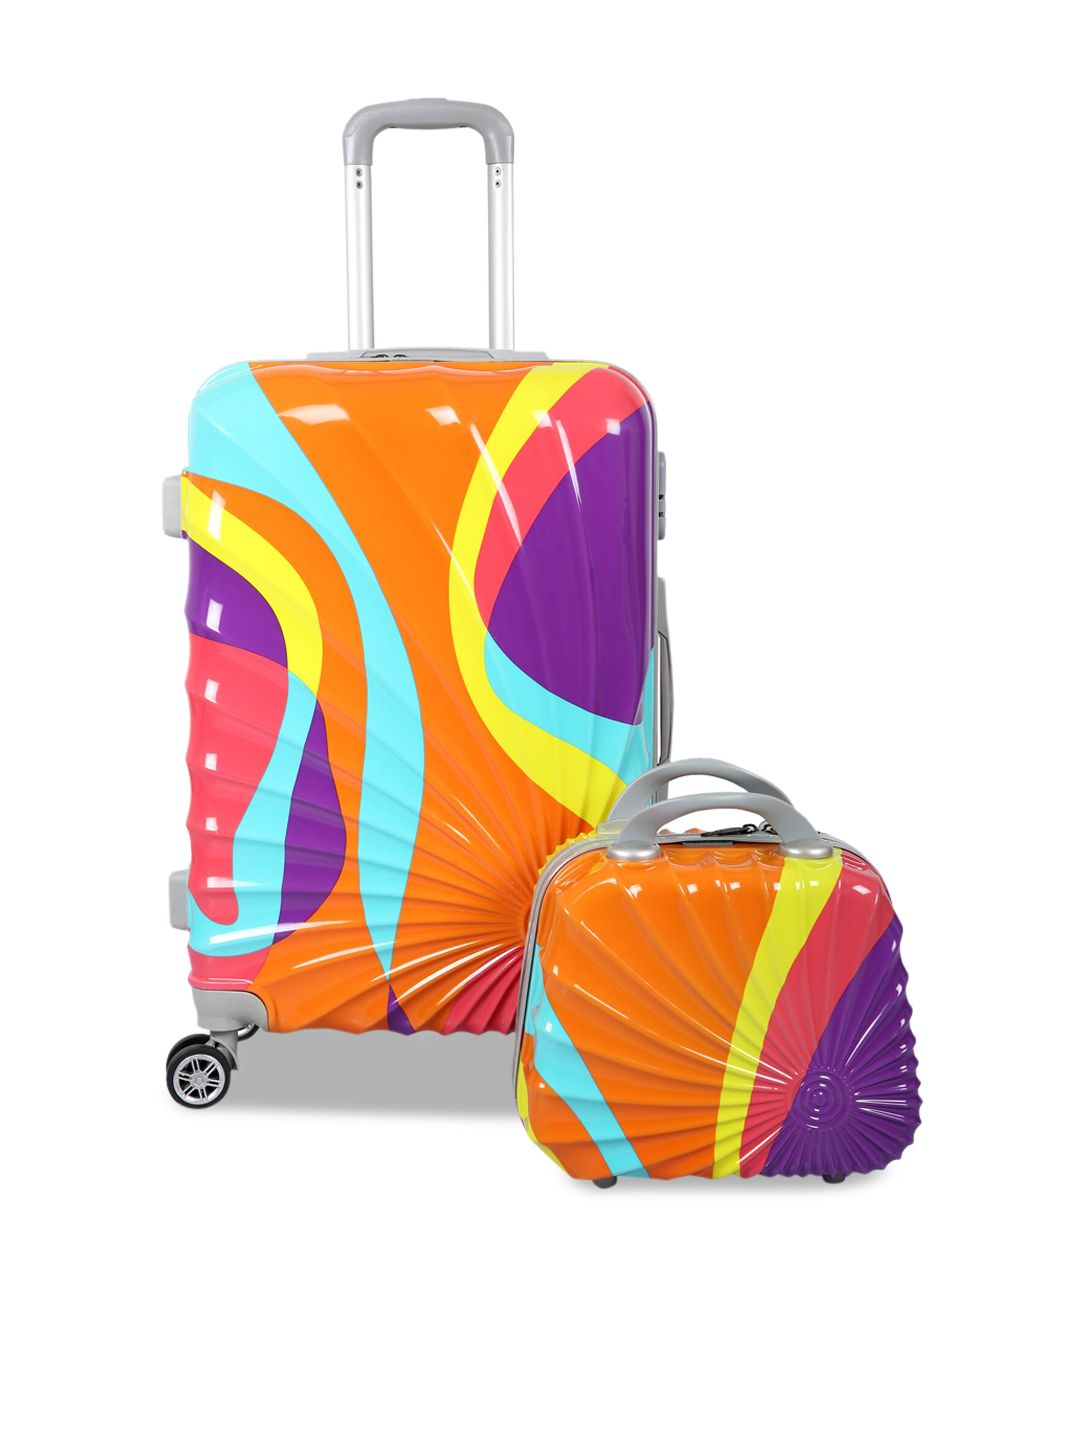 Polo Class Multi 28 inch Trolley Bag Set with 1pc Vanity Bag Price in India